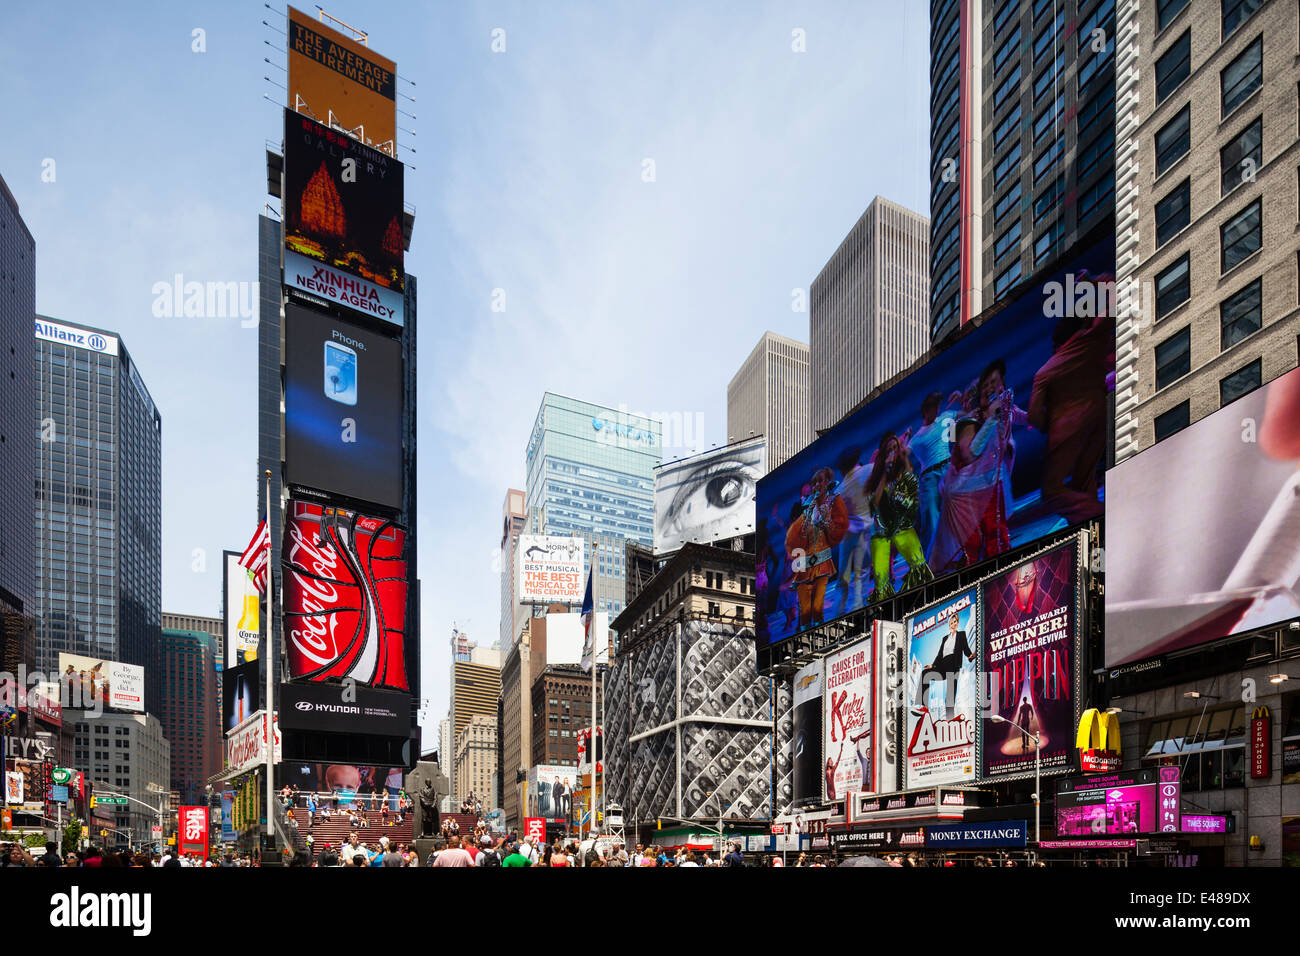 New York City - June 22: Chaotic Times Square crowded with people in New York. Taken with a shift lens on June 22, 2013 Stock Photo